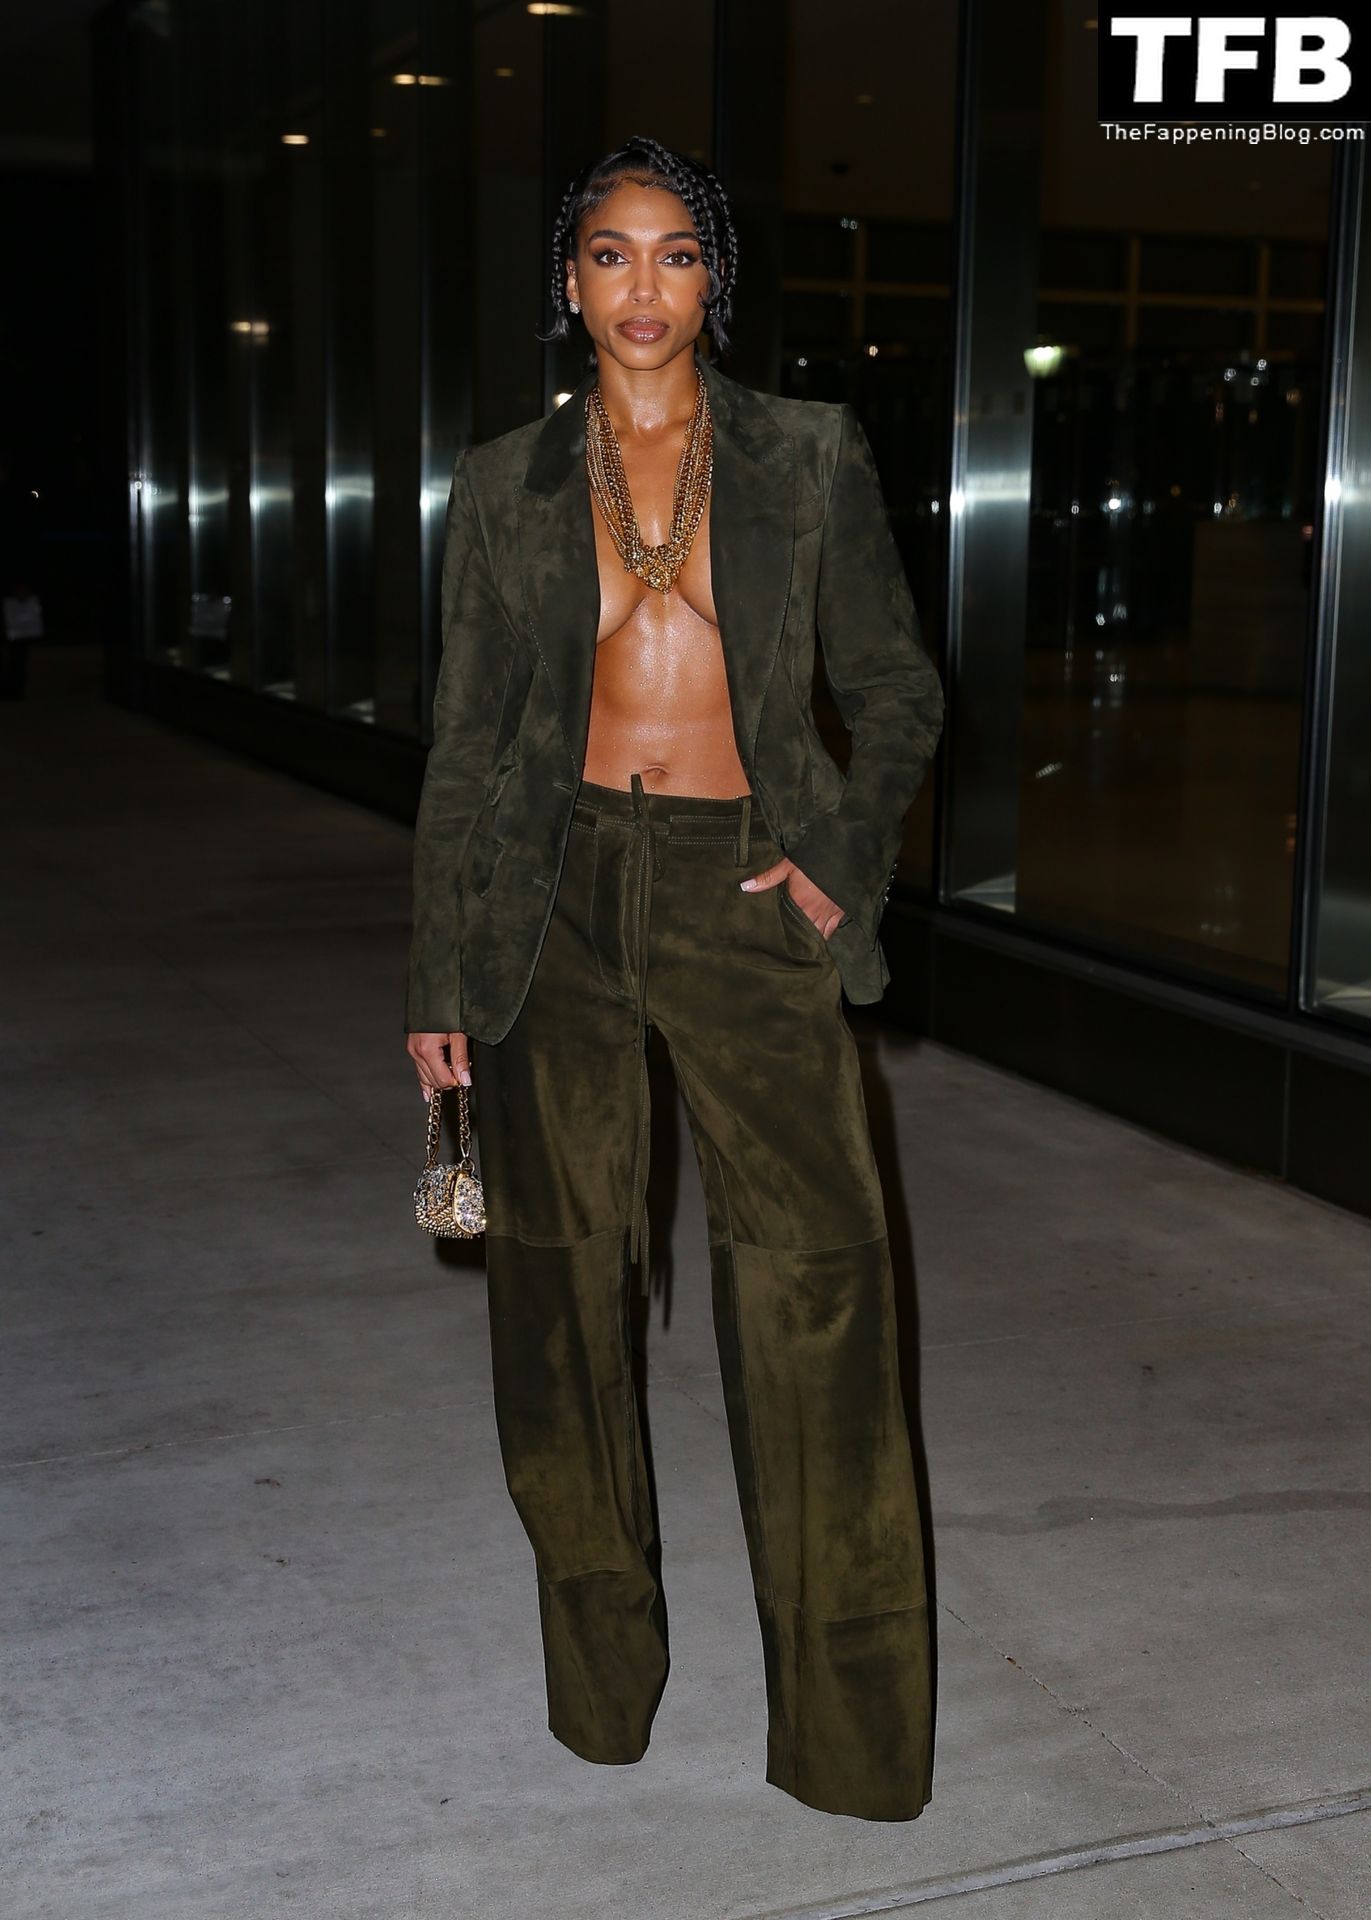 Lori Harvey Sexy The Fappening Blog 12 - Lori Harvey Shows Off Her Tits at the Tom Ford Fashion Show (38 Photos)